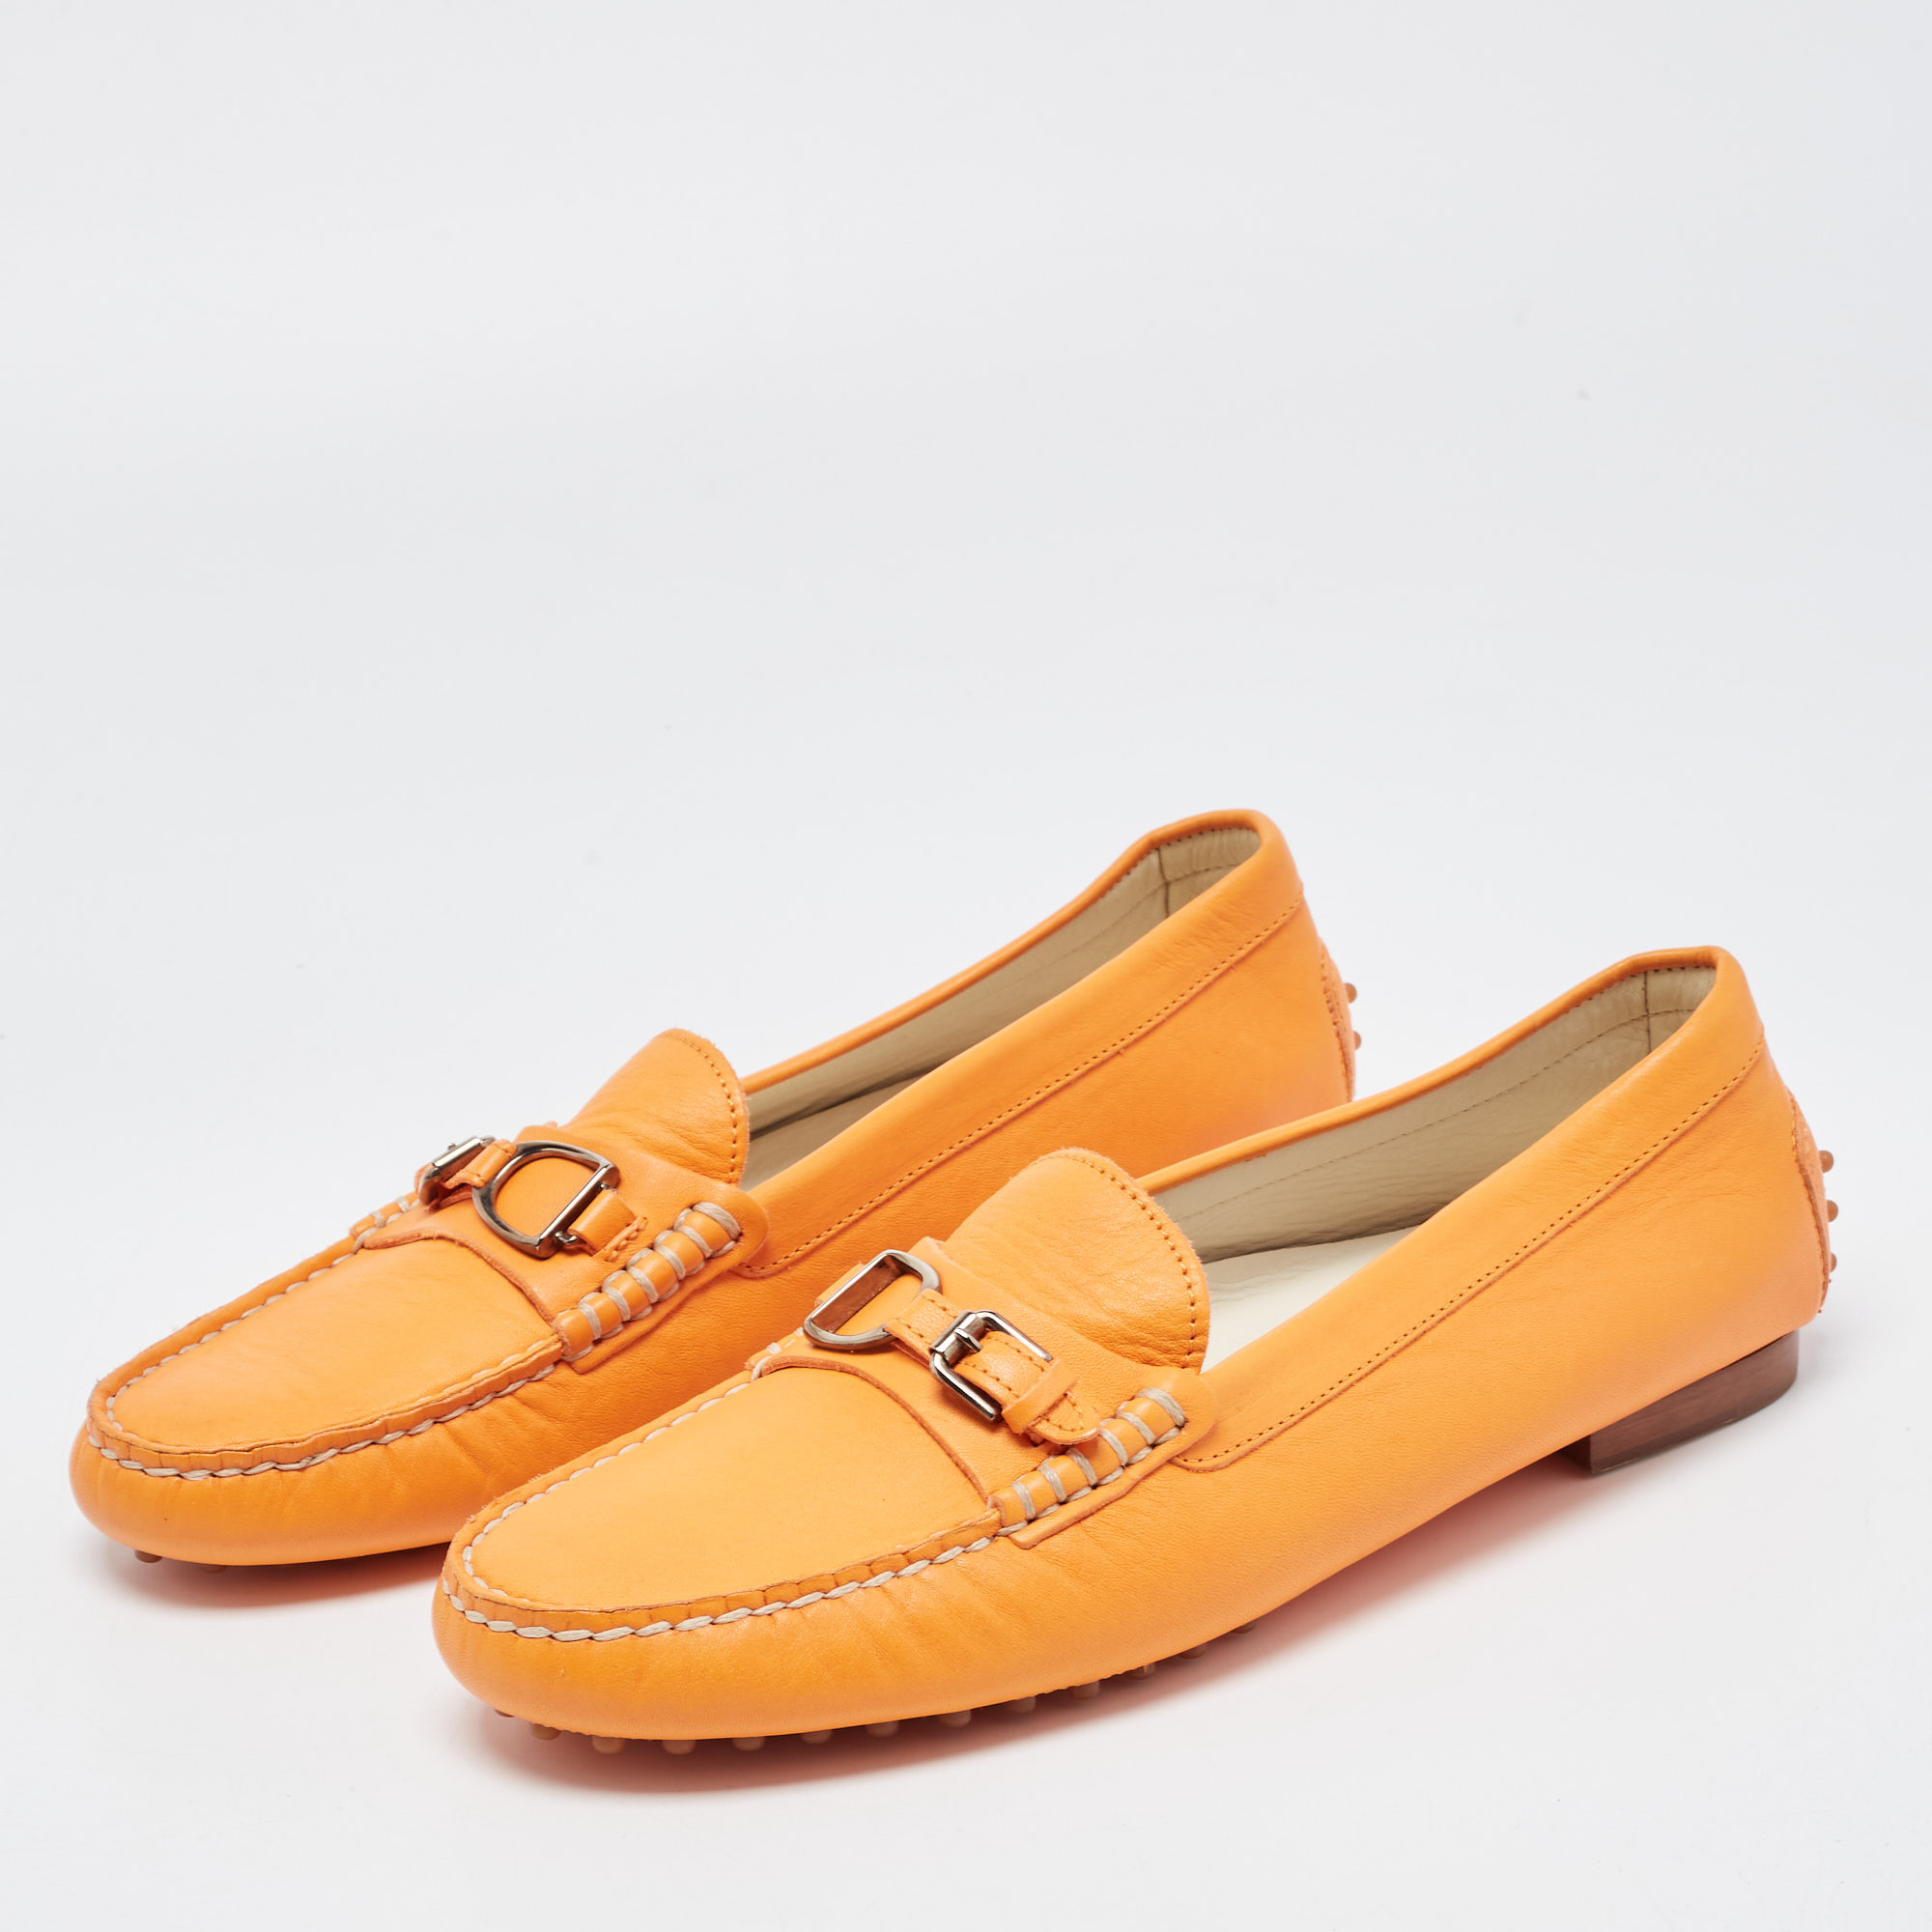 

Ralph Lauren Collection Orange Leather Slip On Loafers Size